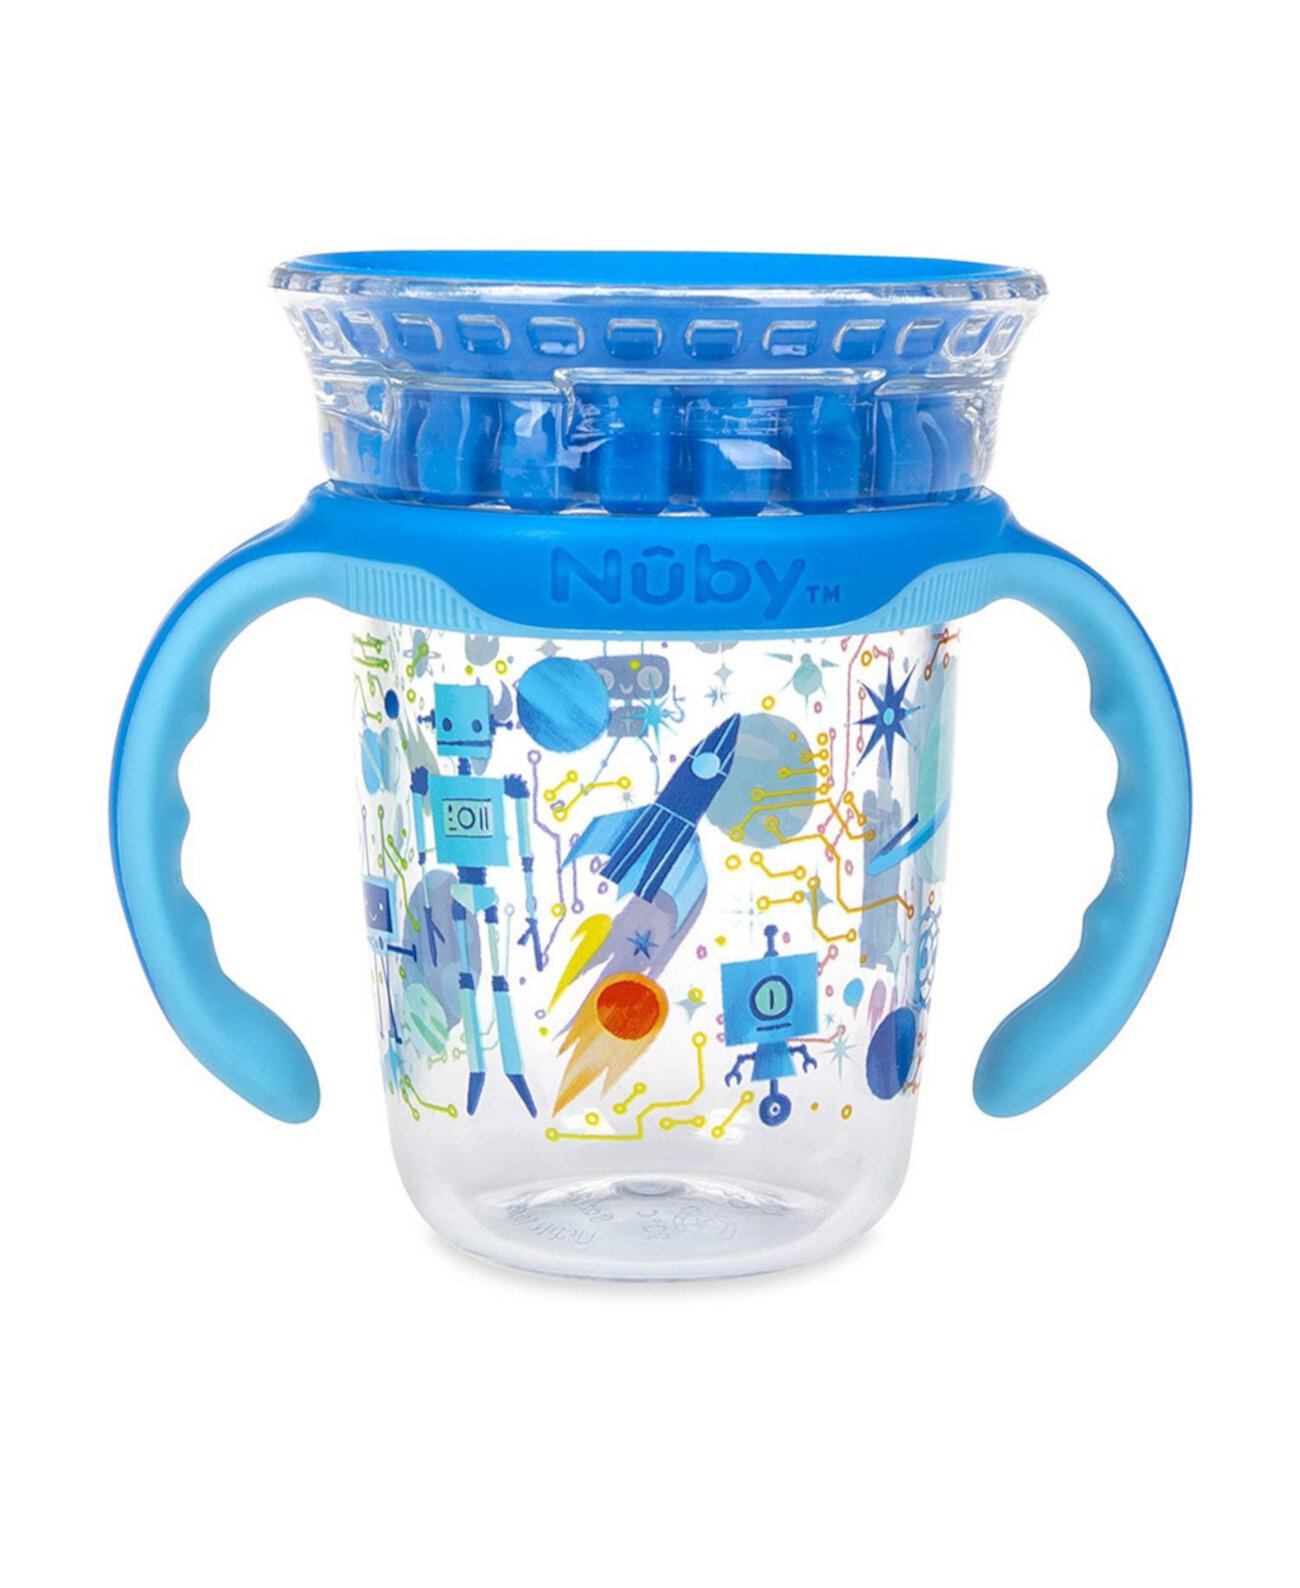 No-Spill Edge 360 2 Stage Drinking Cup with Removable Handles, Blue Robot NUBY